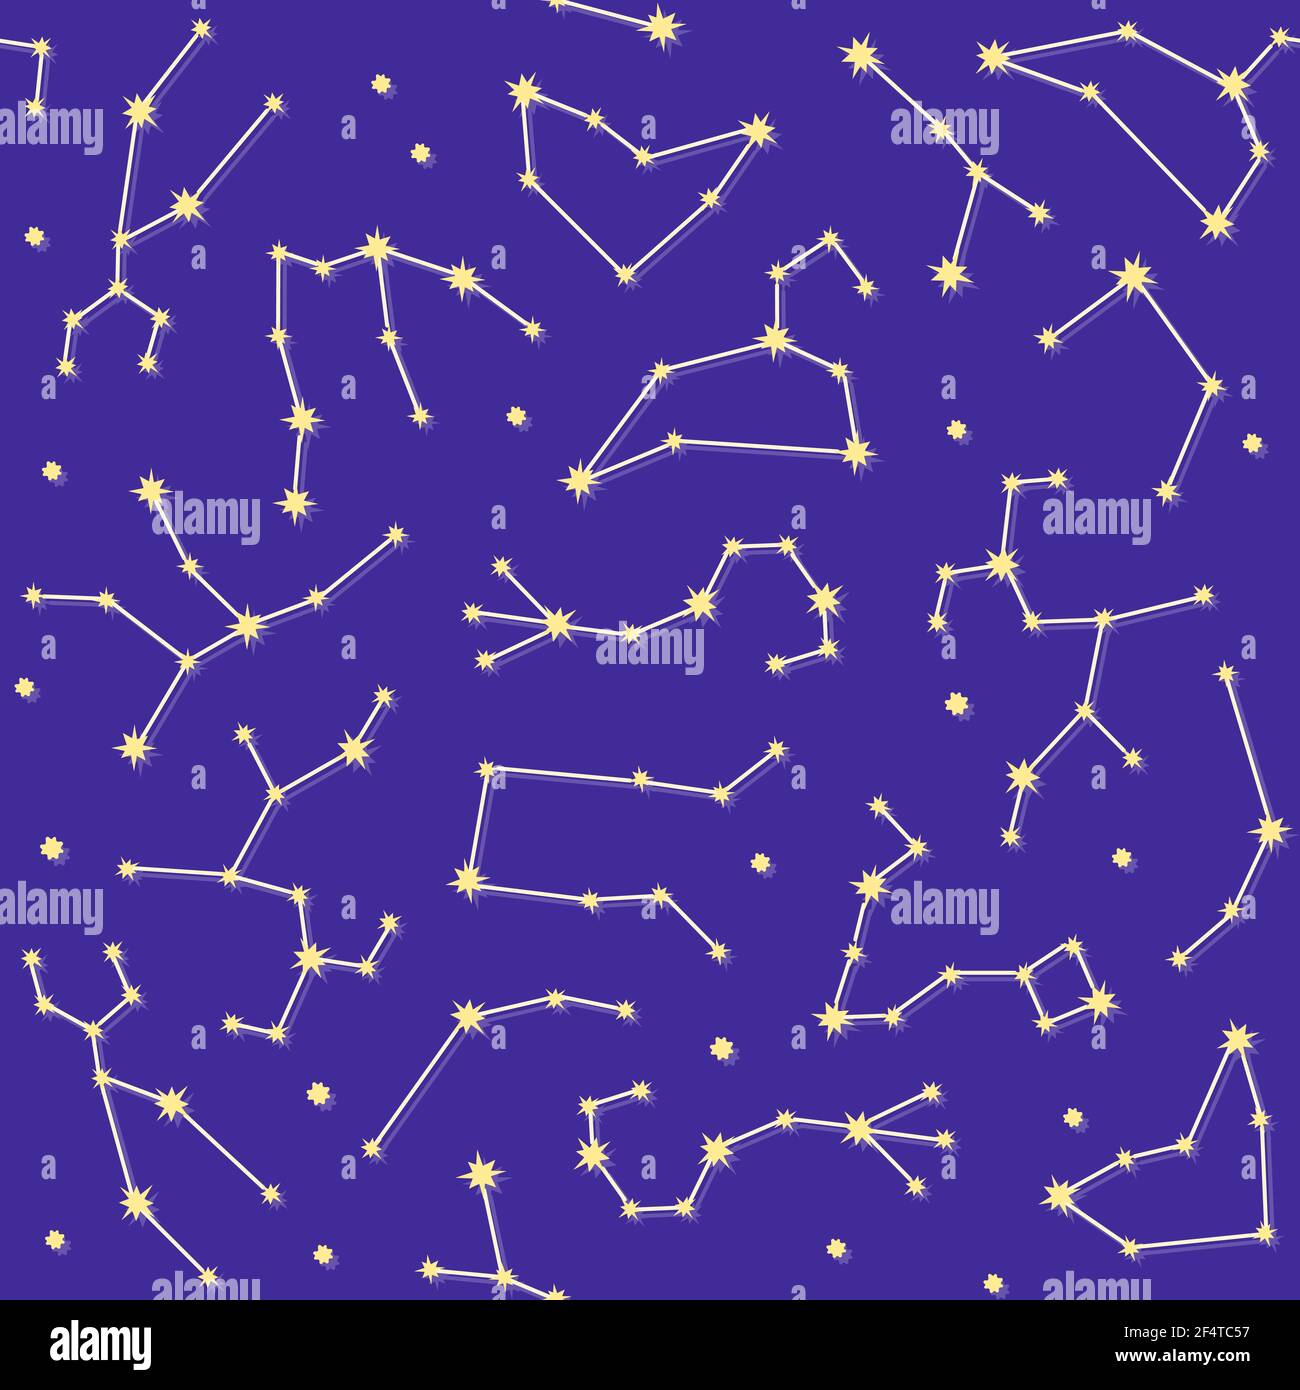 Space seamless pattern with zodiac constellation symbols. Astrology background with connected shining star signs. Vector illustration. Stock Vector